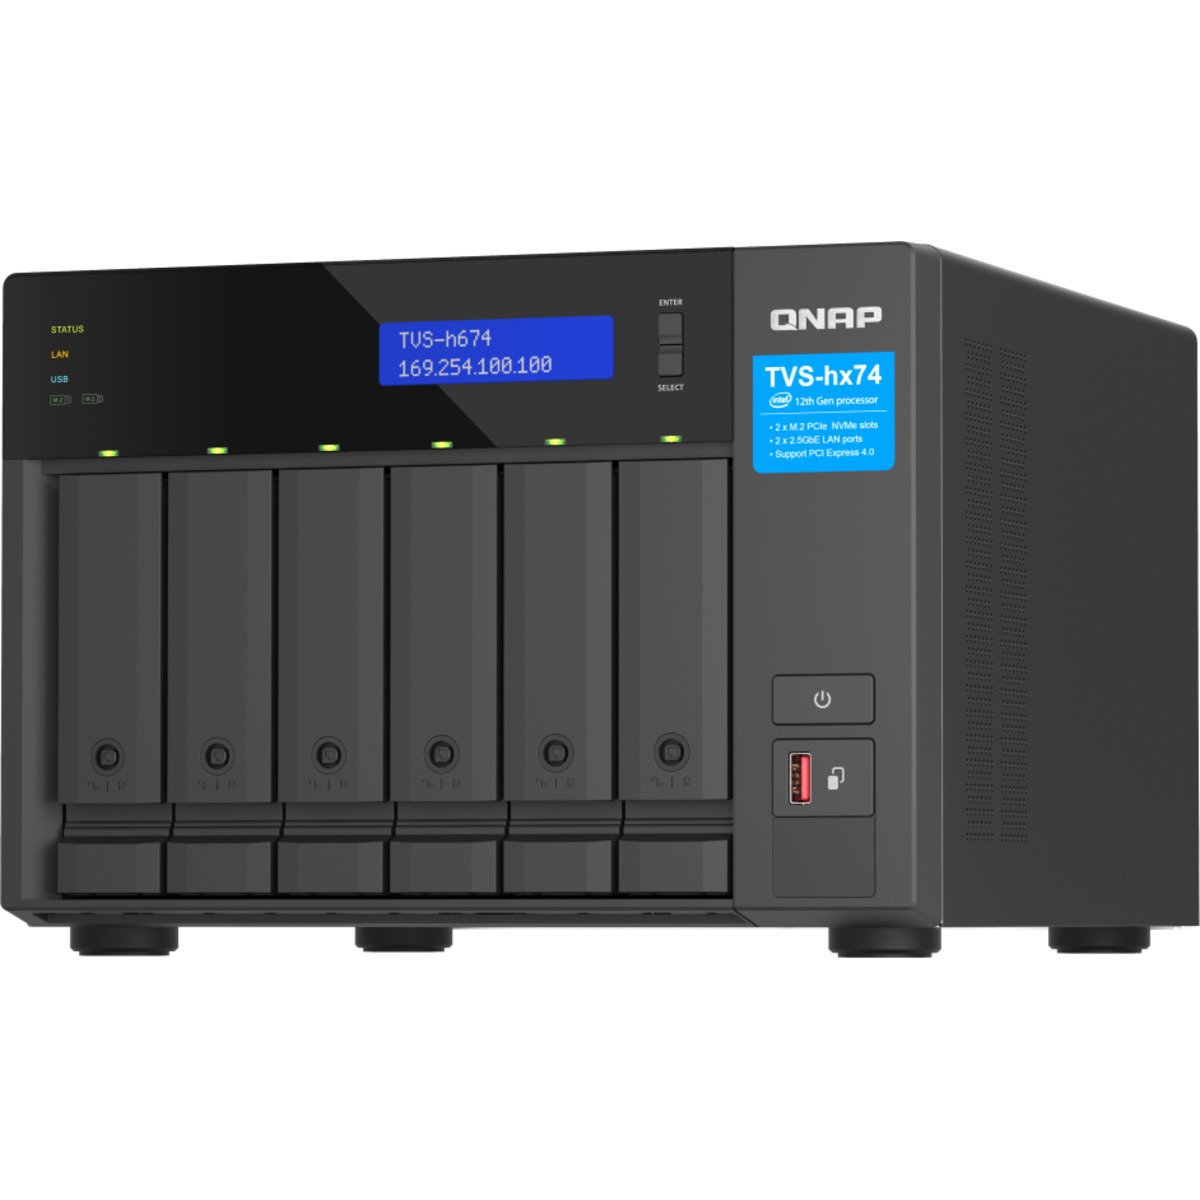 QNAP TVS-h674 Core i5 56tb 6-Bay Desktop Multimedia / Power User / Business NAS - Network Attached Storage Device 4x14tb Western Digital Gold WD142KRYZ 3.5 7200rpm SATA 6Gb/s HDD ENTERPRISE Class Drives Installed - Burn-In Tested TVS-h674 Core i5